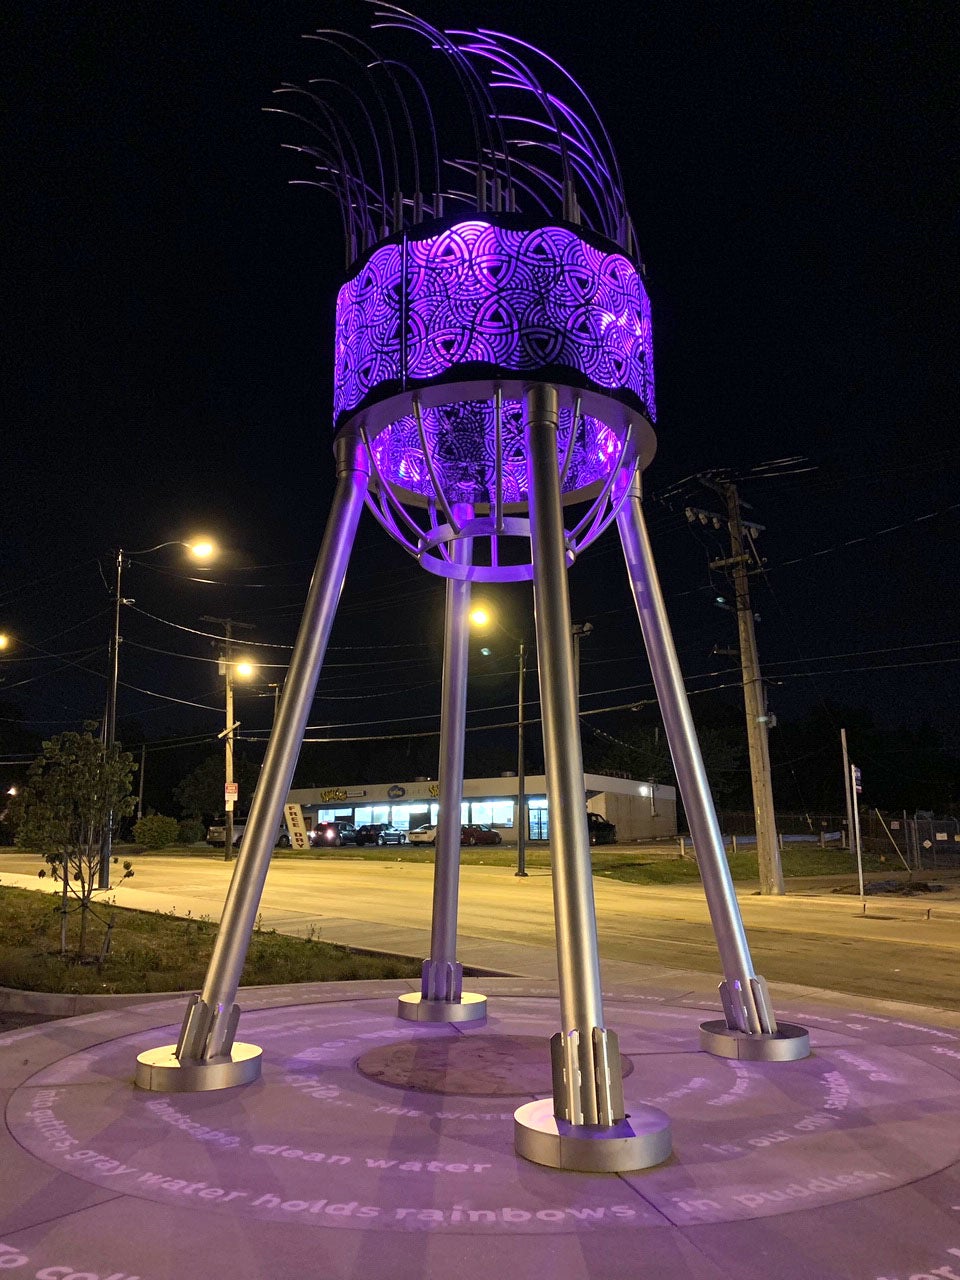 A water tower illuminated by purple light